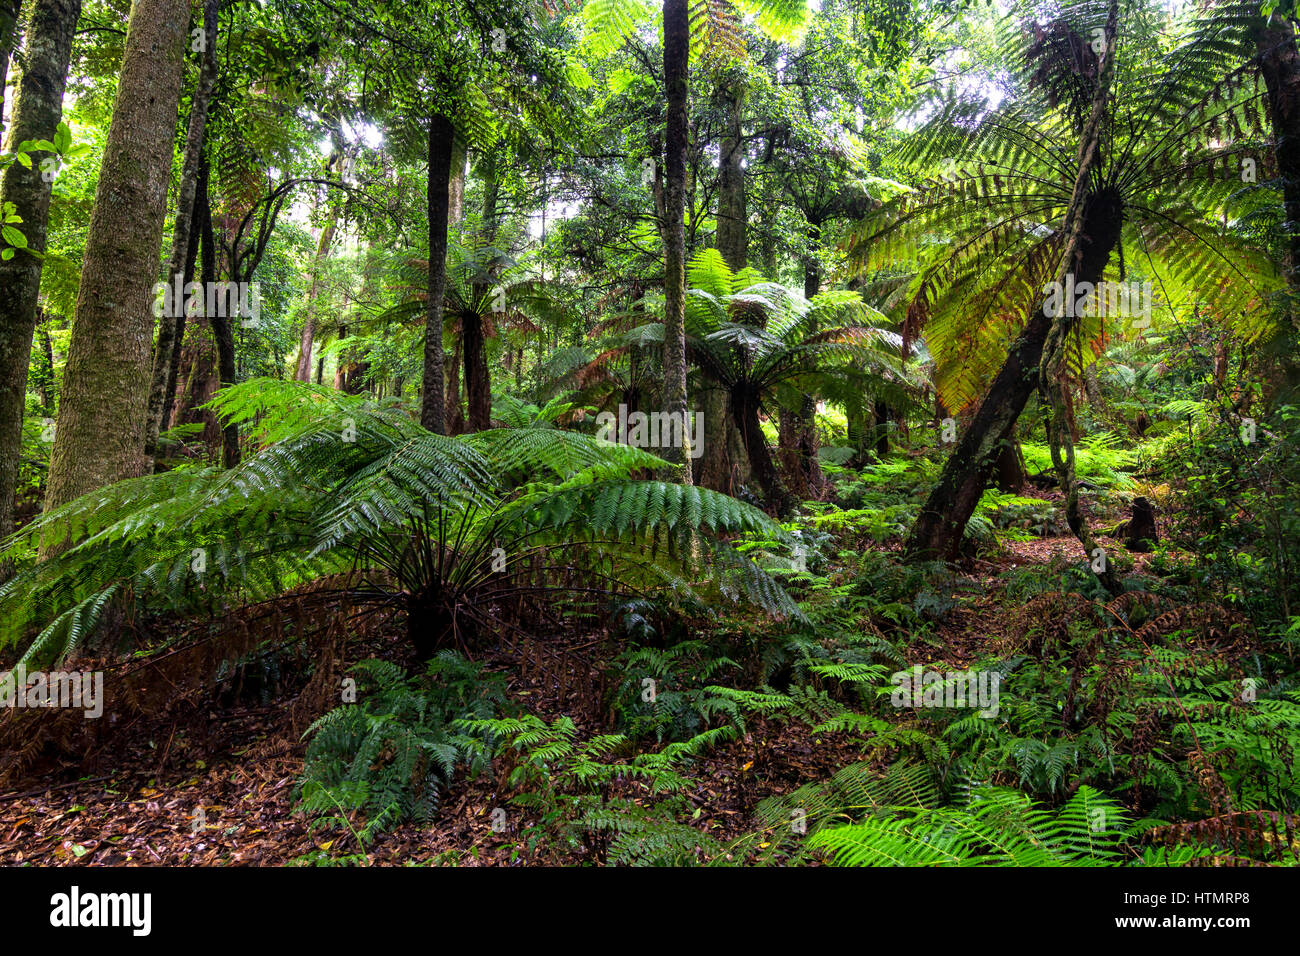 Cathedral of Ferns, Australia Stock Photo